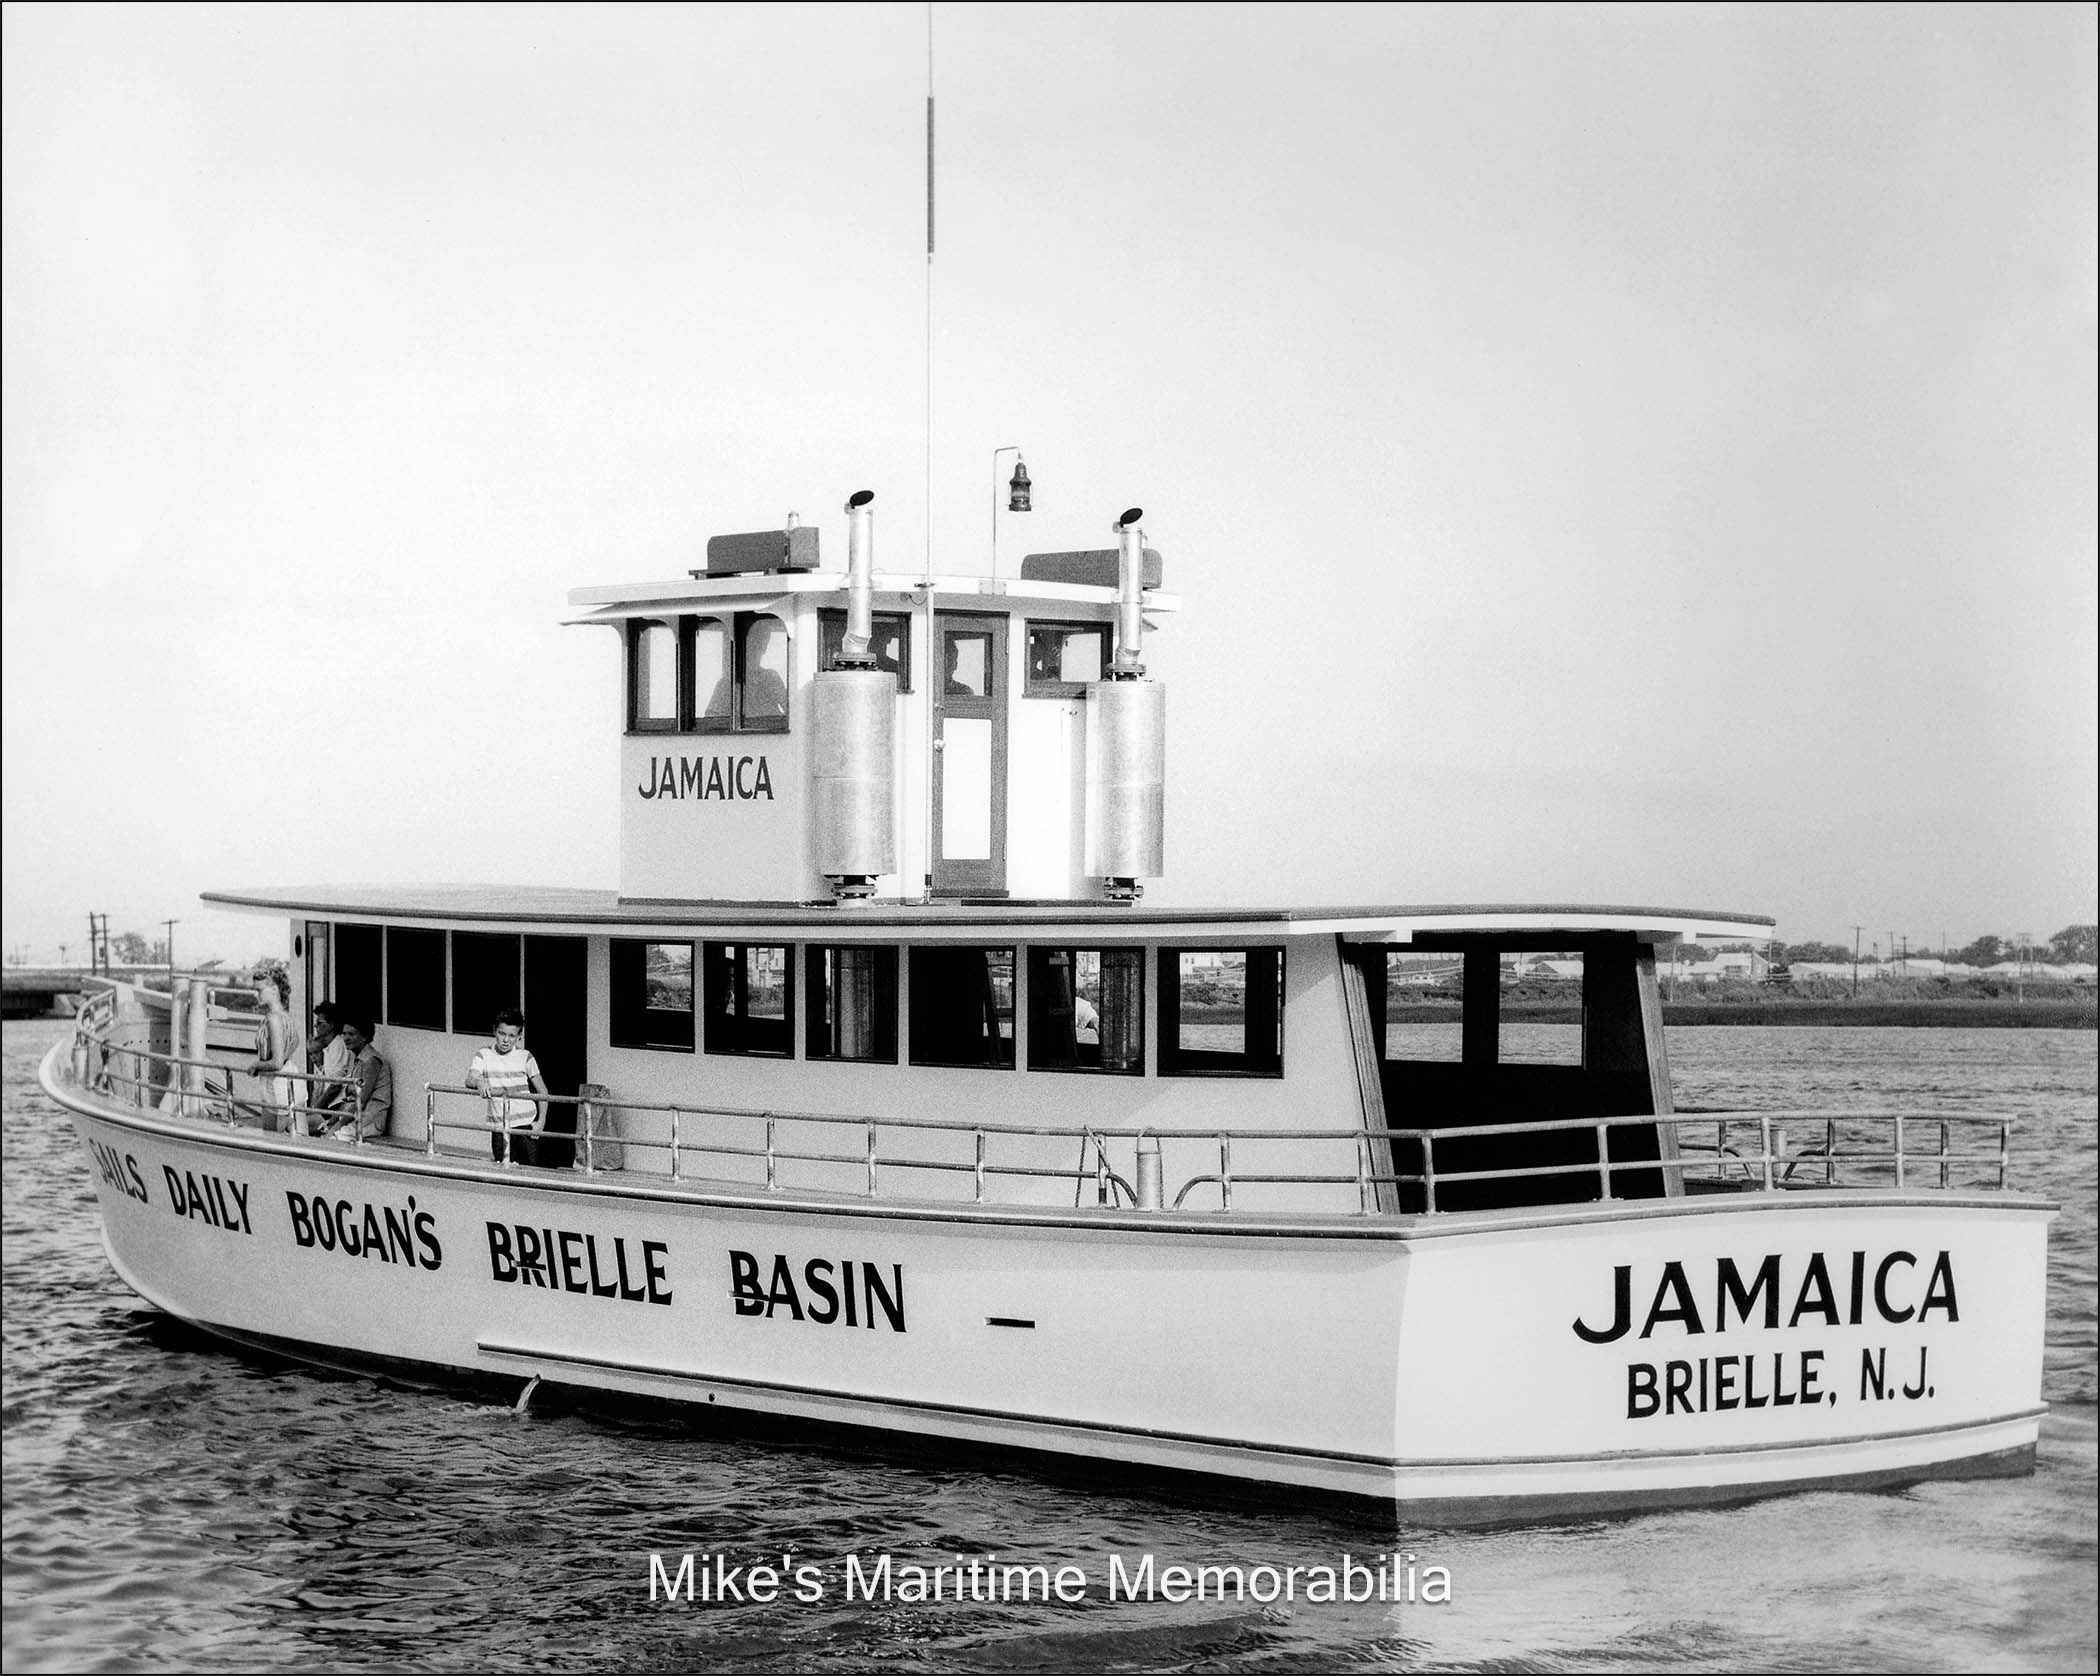 JAMAICA, Brielle, NJ – 1957 The original "JAMAICA", from Bogan’s Brielle Basin, Brielle, NJ circa 1957. Stowman Shipyards, Dorchester, NJ built this 65 foot boat in 1957 and two GM 110 diesels provided the power. Captain Howard Bogan Sr. initially operated the "JAMAICA" and was later followed by Captain Dave Bogan Sr. This particularly nice picture was taken before a dodger was built around the pilothouse. She later became the "JAMAICA II" and then became Captain William Egerter Jr's "DAUNTLESS 2" and sailed from Broadway Basin, Point Pleasant Beach, NJ. In 1974, she became the "ATLANTIS" and then the "ATLANTIS II". After that, she sailed as the "RELIABLE III" from Bowers Beach, DE and after that she was remodeled, re-powered, relocated to Cape May, NJ and last sailed as the "SEA STAR II". The photo is courtesy of Captain Dave Bogan Sr. [This is Mel's favorite picture... What a beauty!]